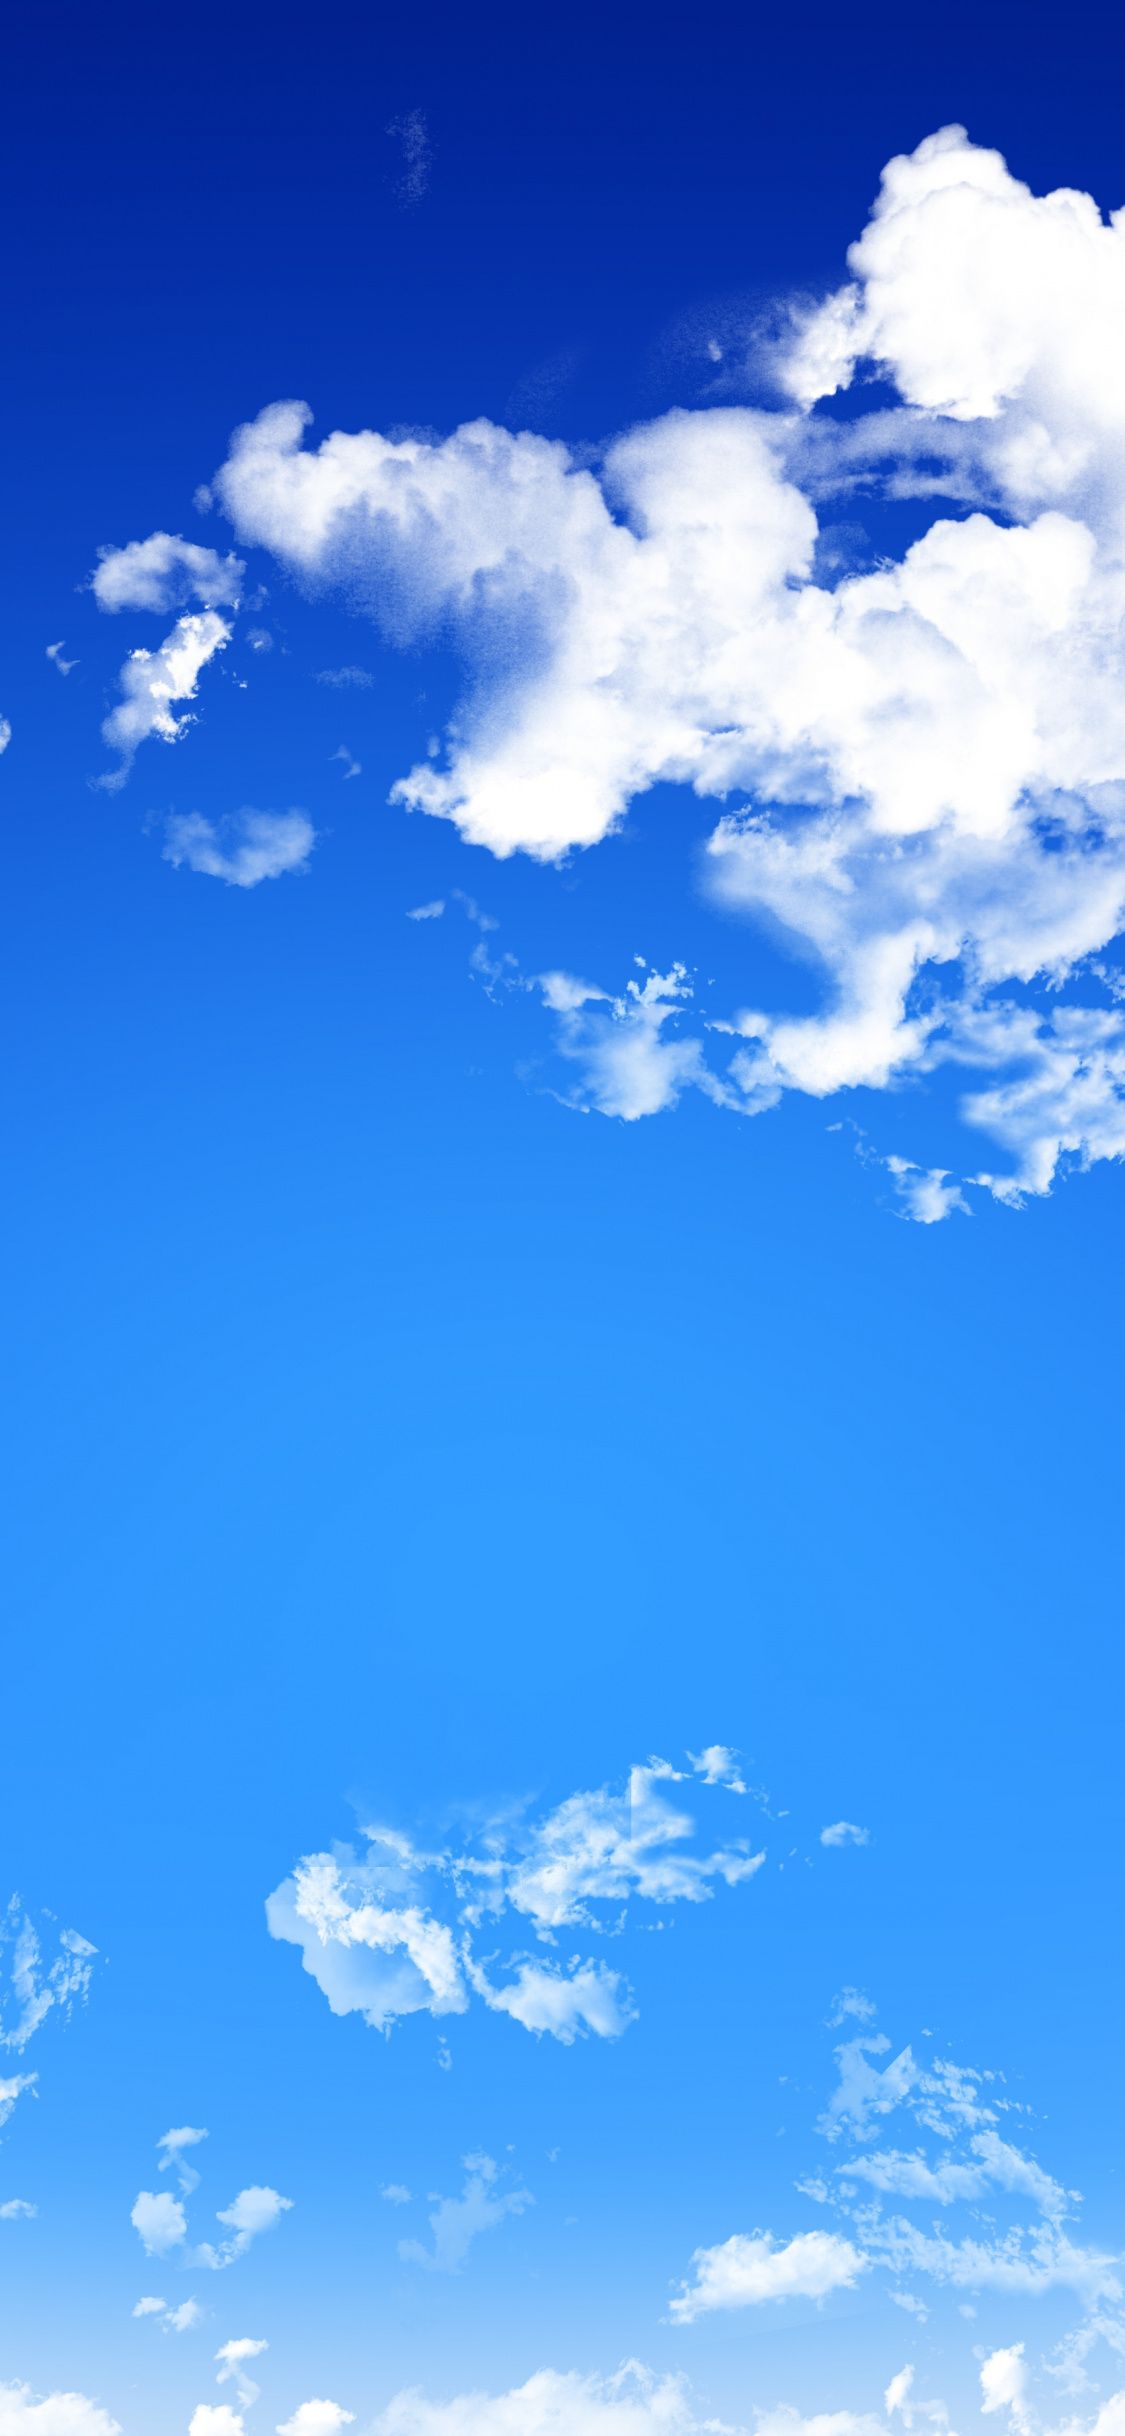 Day, Atmosphere, Blue, Daytime, Sky Wallpaper For iPhone Background Image For Photohop, Download Wallpaper